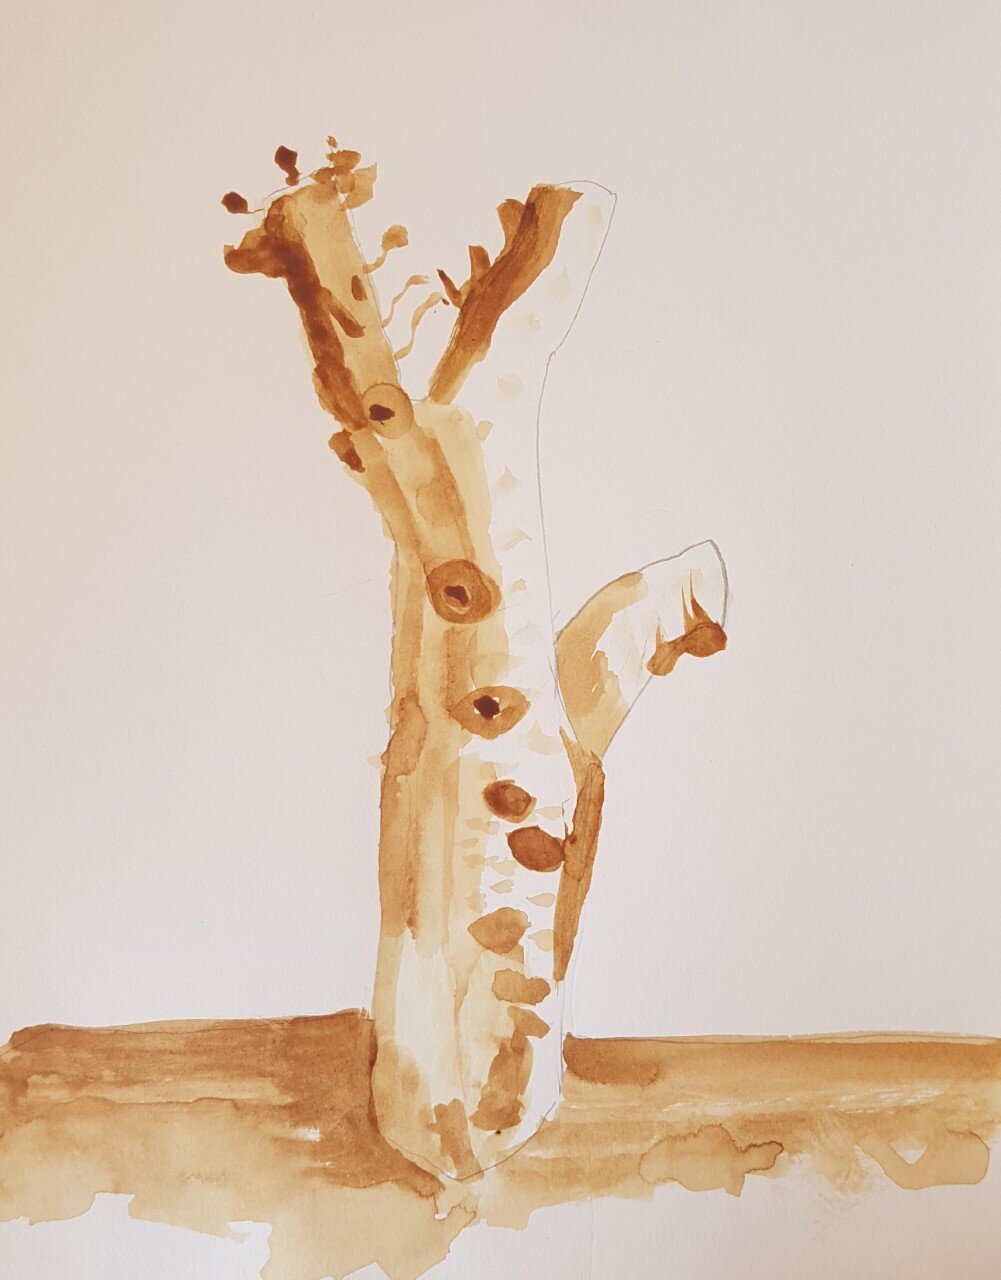 Coffee Tree by Lucas Holloway age 8